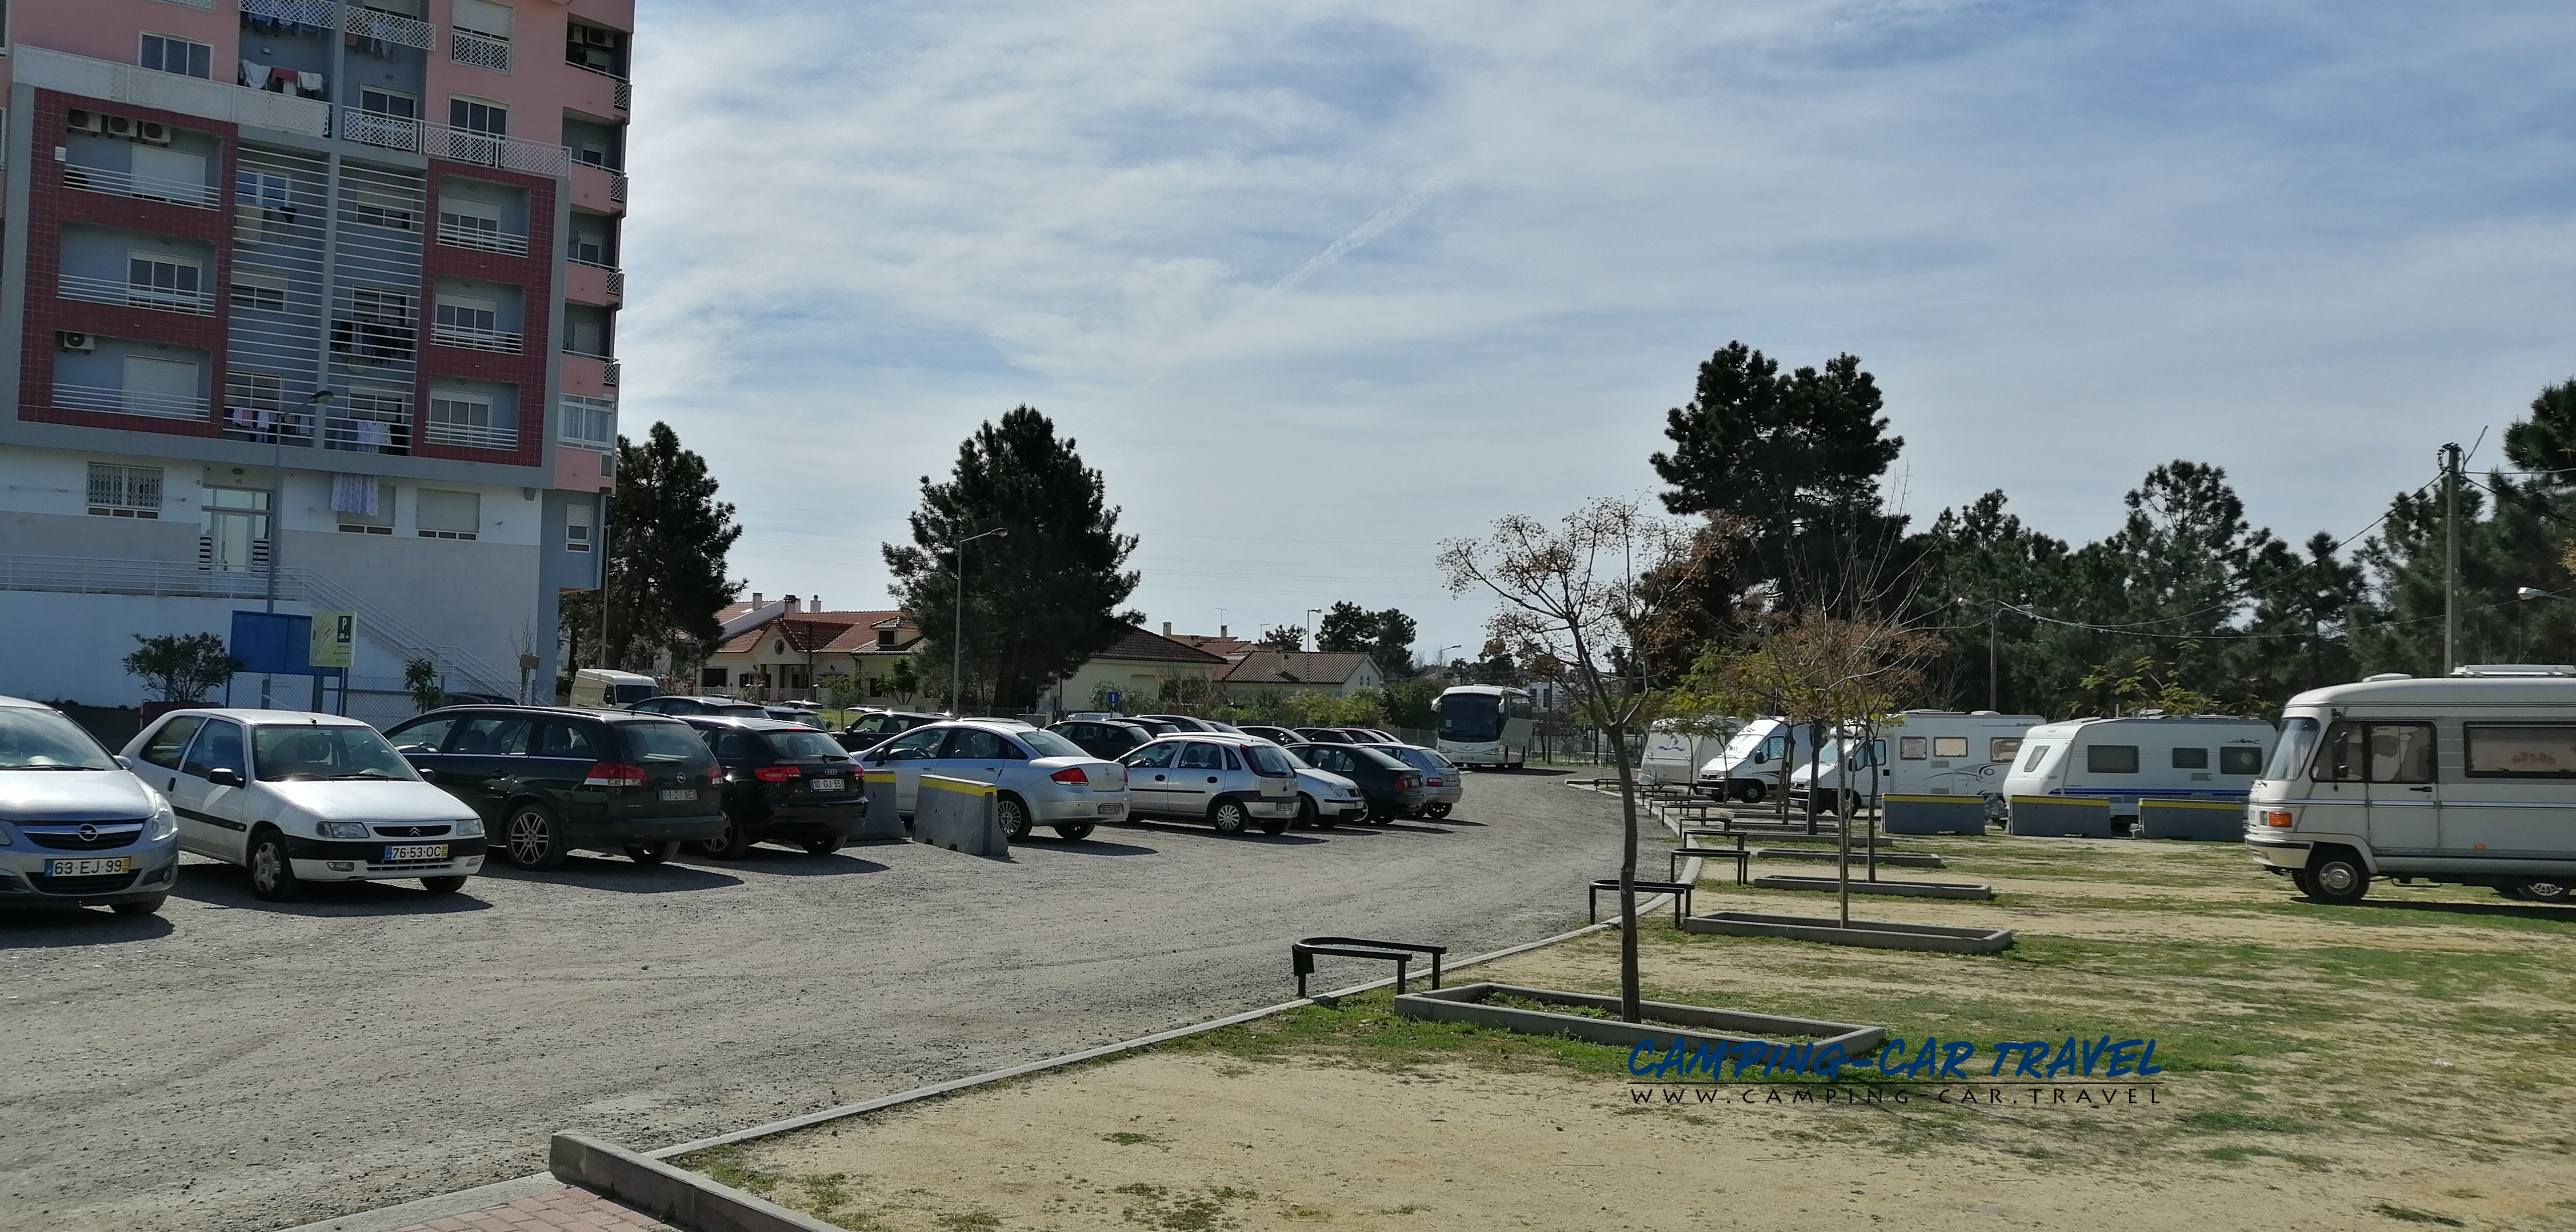 aire services camping car Corroios Portugal